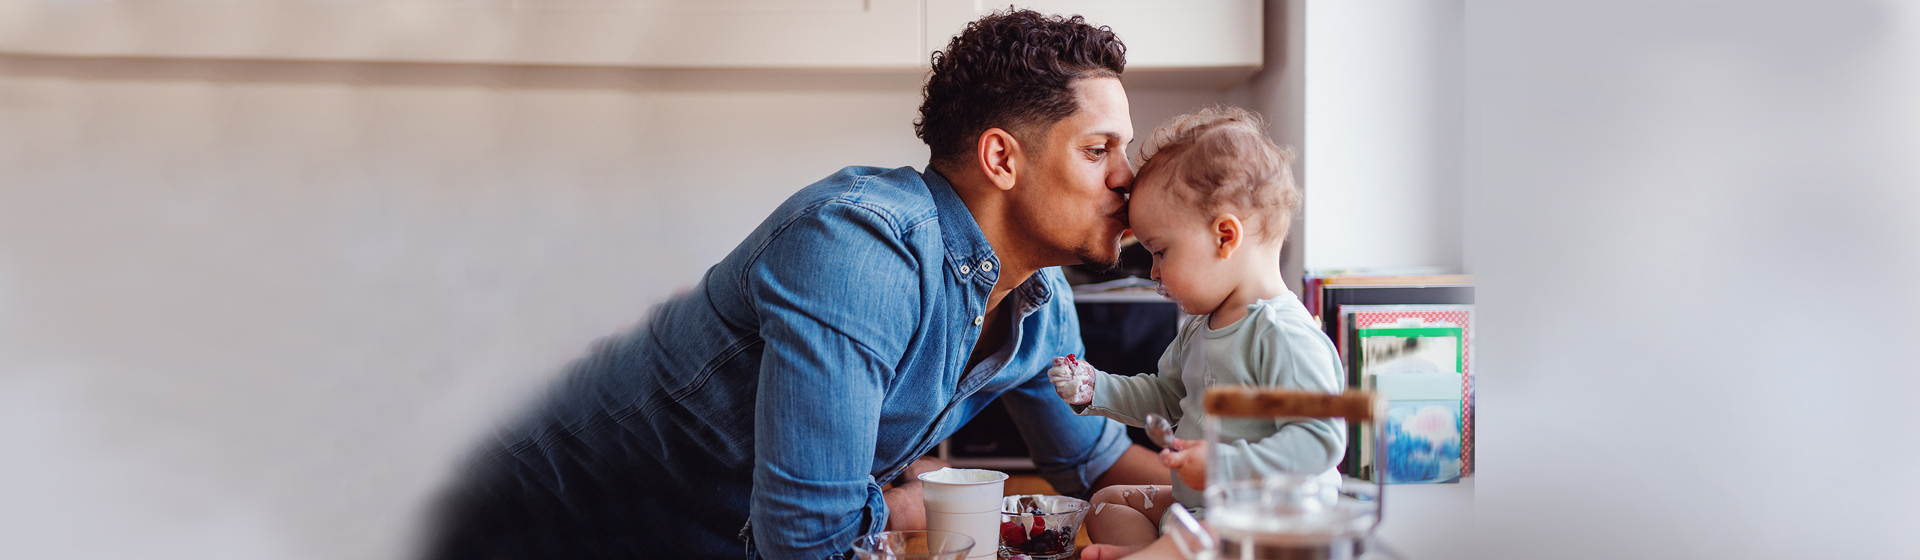 father kissing child's forehead in kitchen